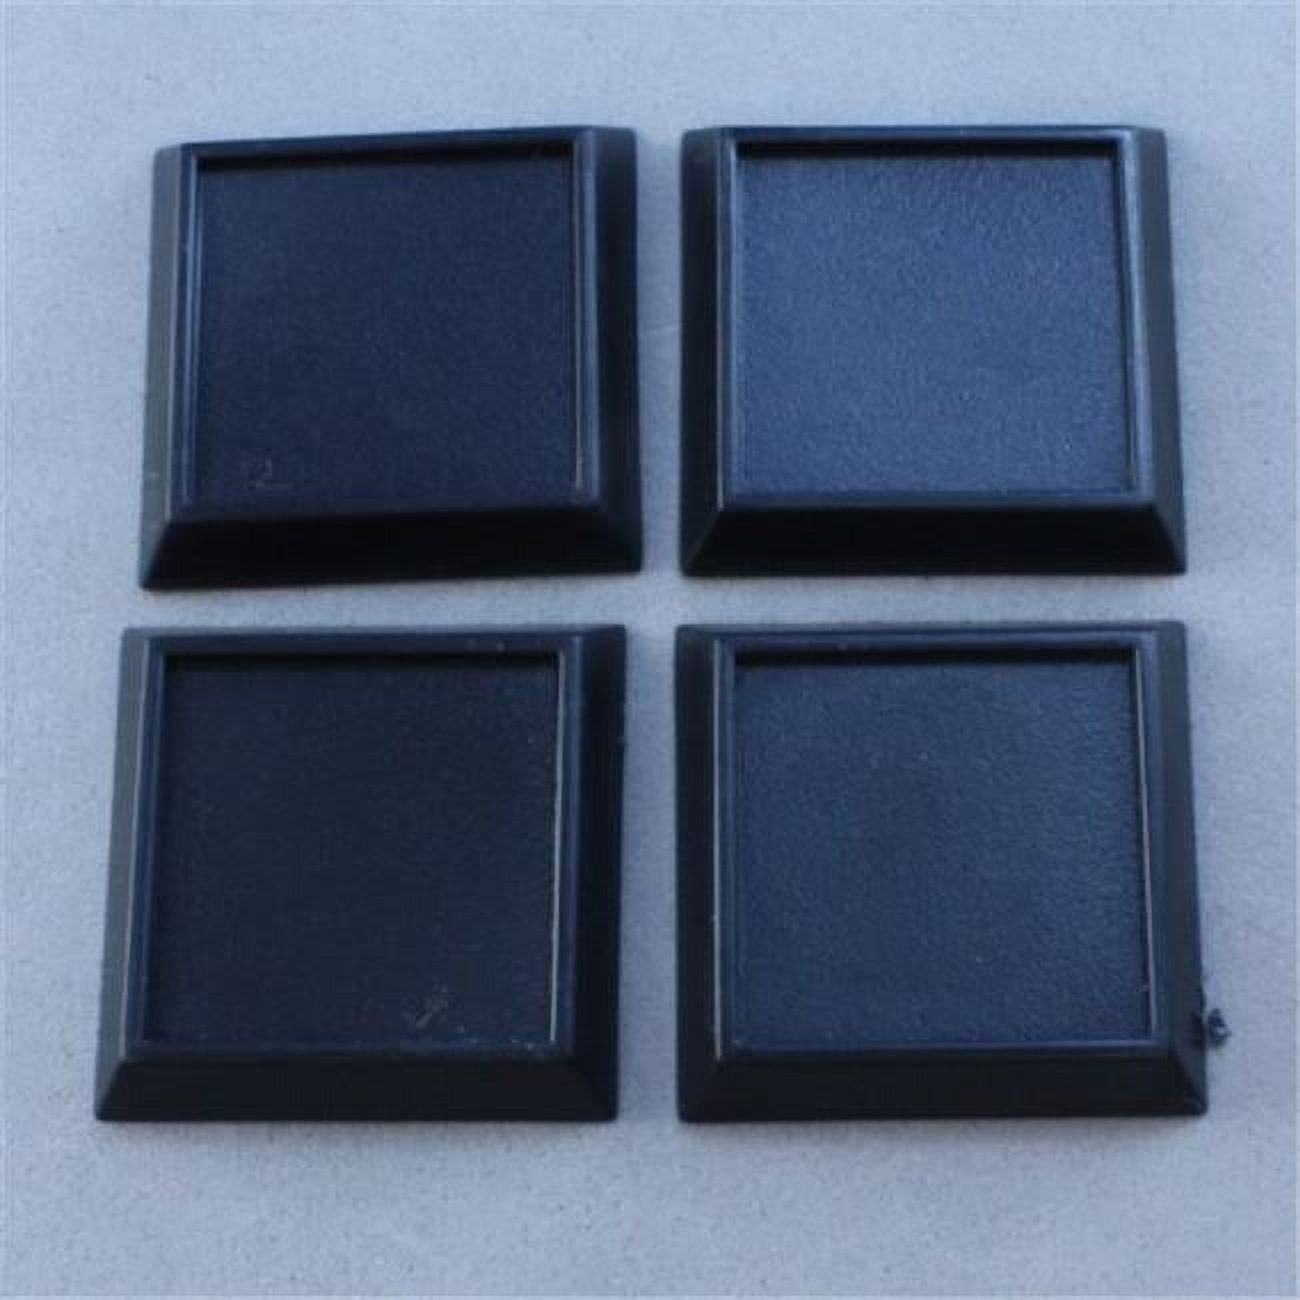 1 In. Square Lippe Plastic Miniature Rpg Base Miniatures, Black - Pack Of 20